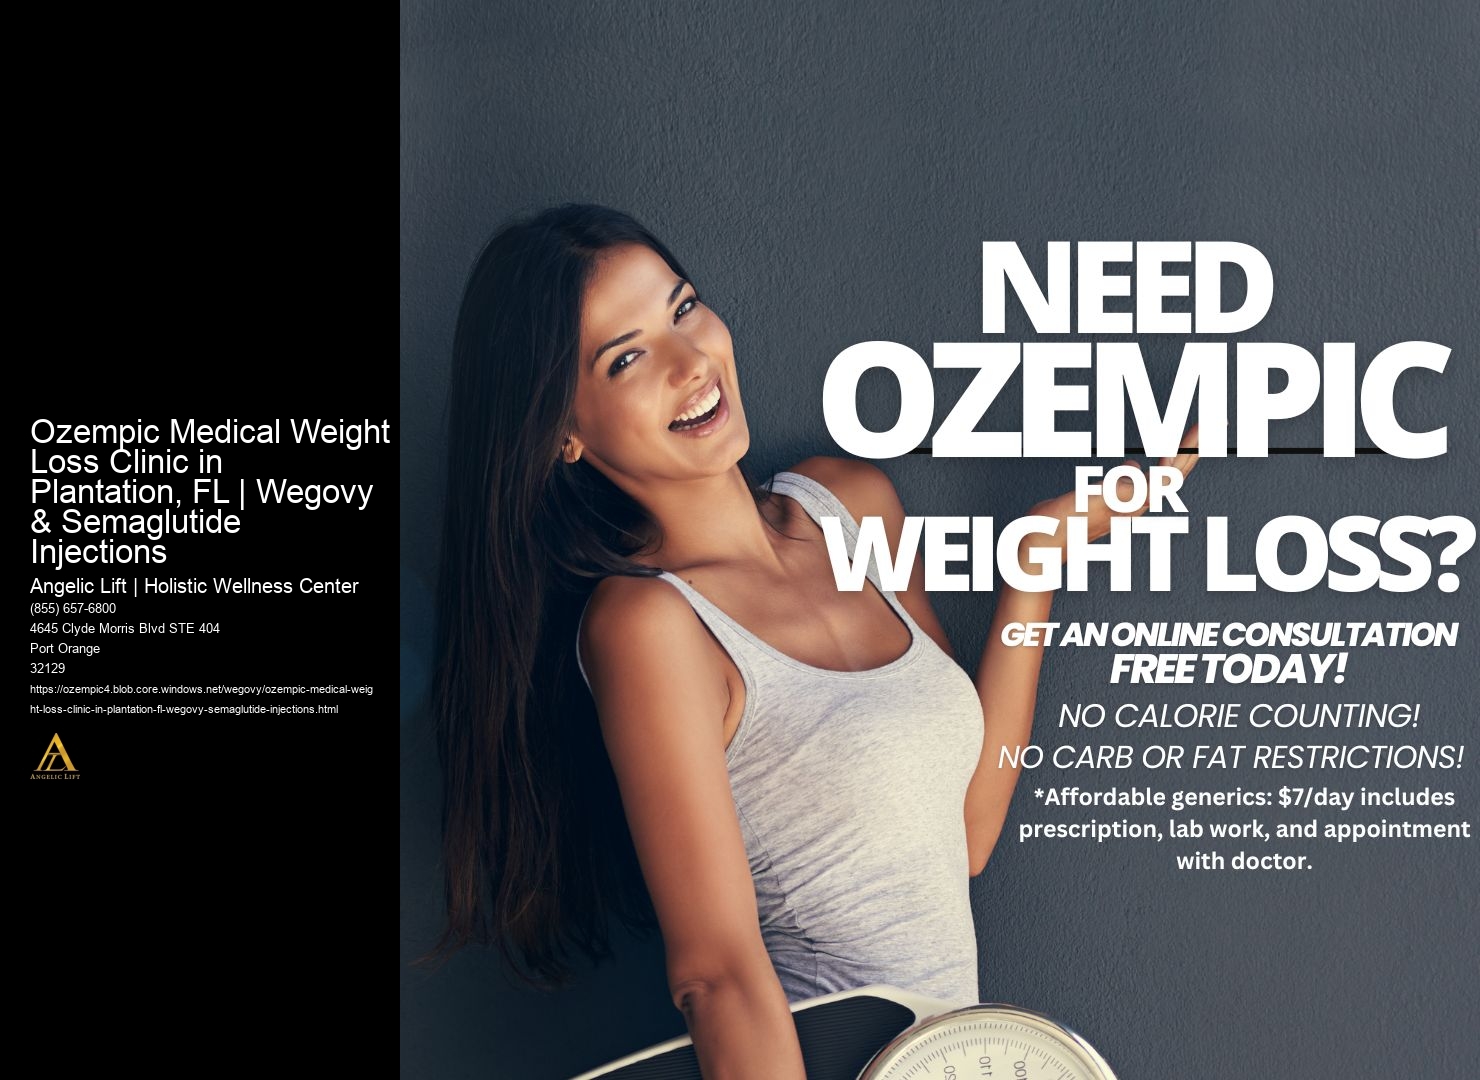 Ozempic Medical Weight Loss Clinic in Plantation, FL | Wegovy & Semaglutide Injections